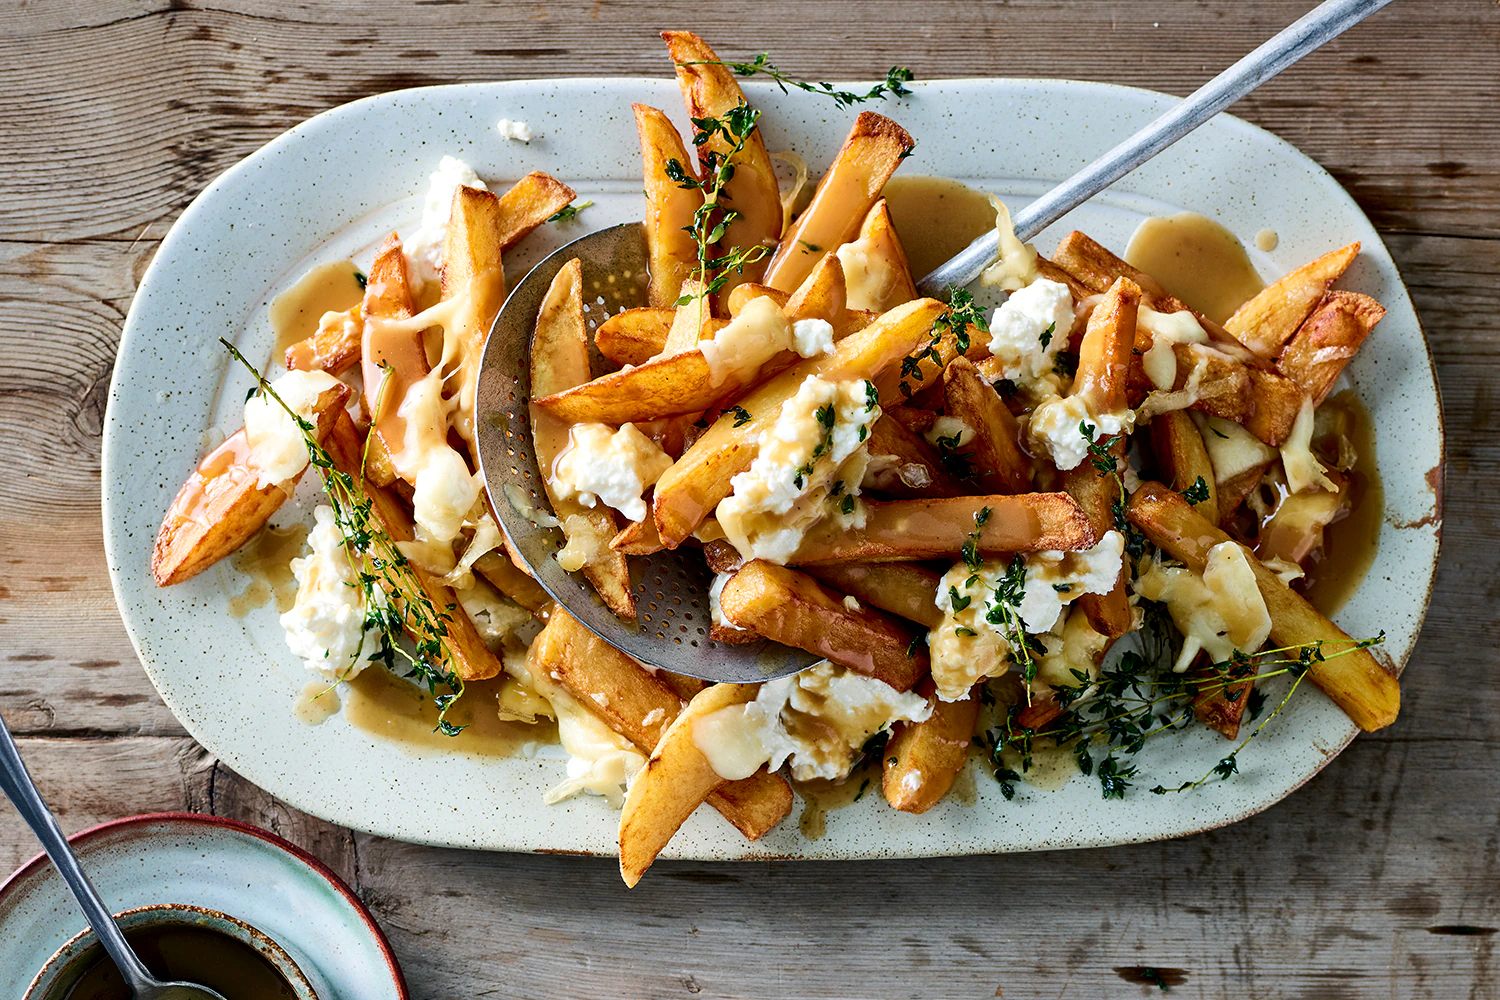 Health Considerations and Alternatives for Poutine